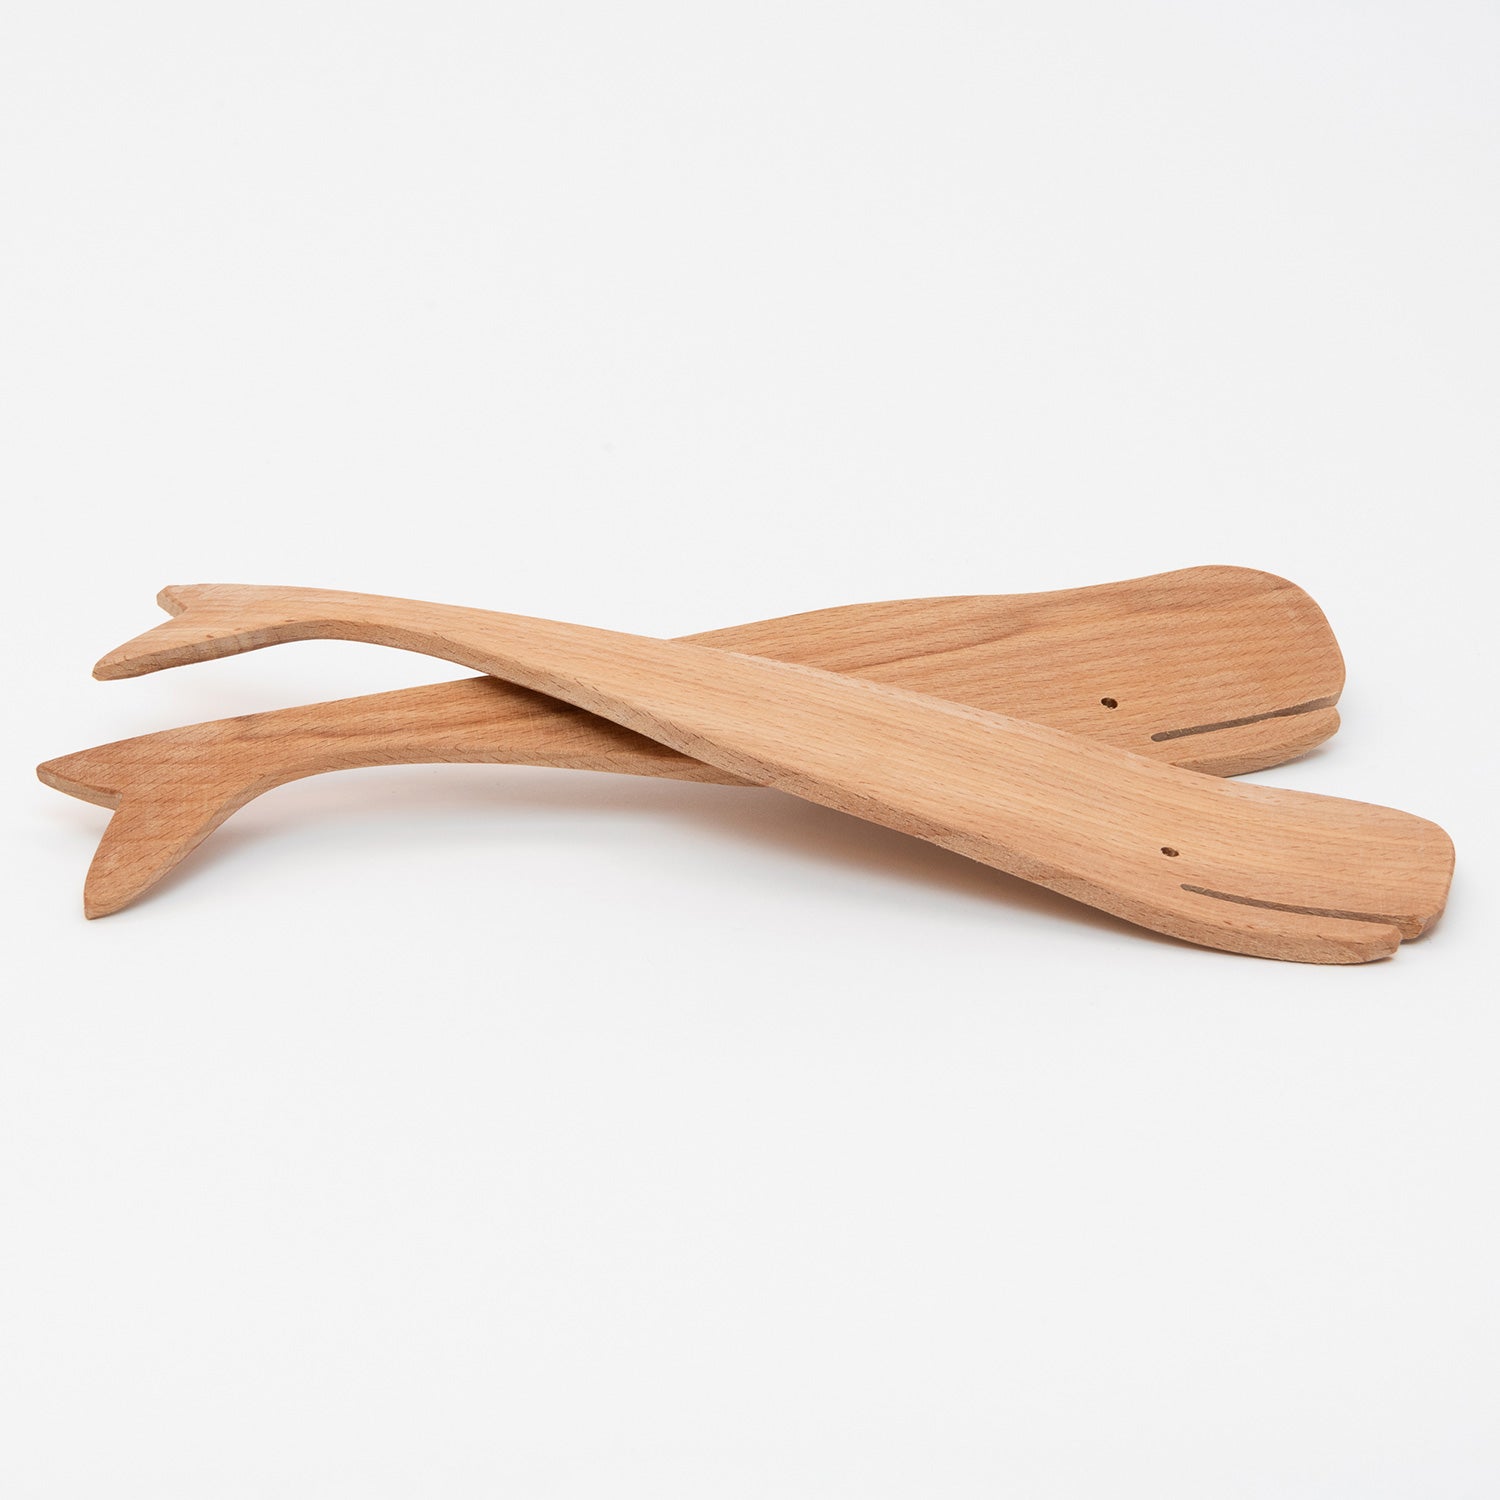 Two wooden salad servers in the shape of a whale. Pictured on a white background.